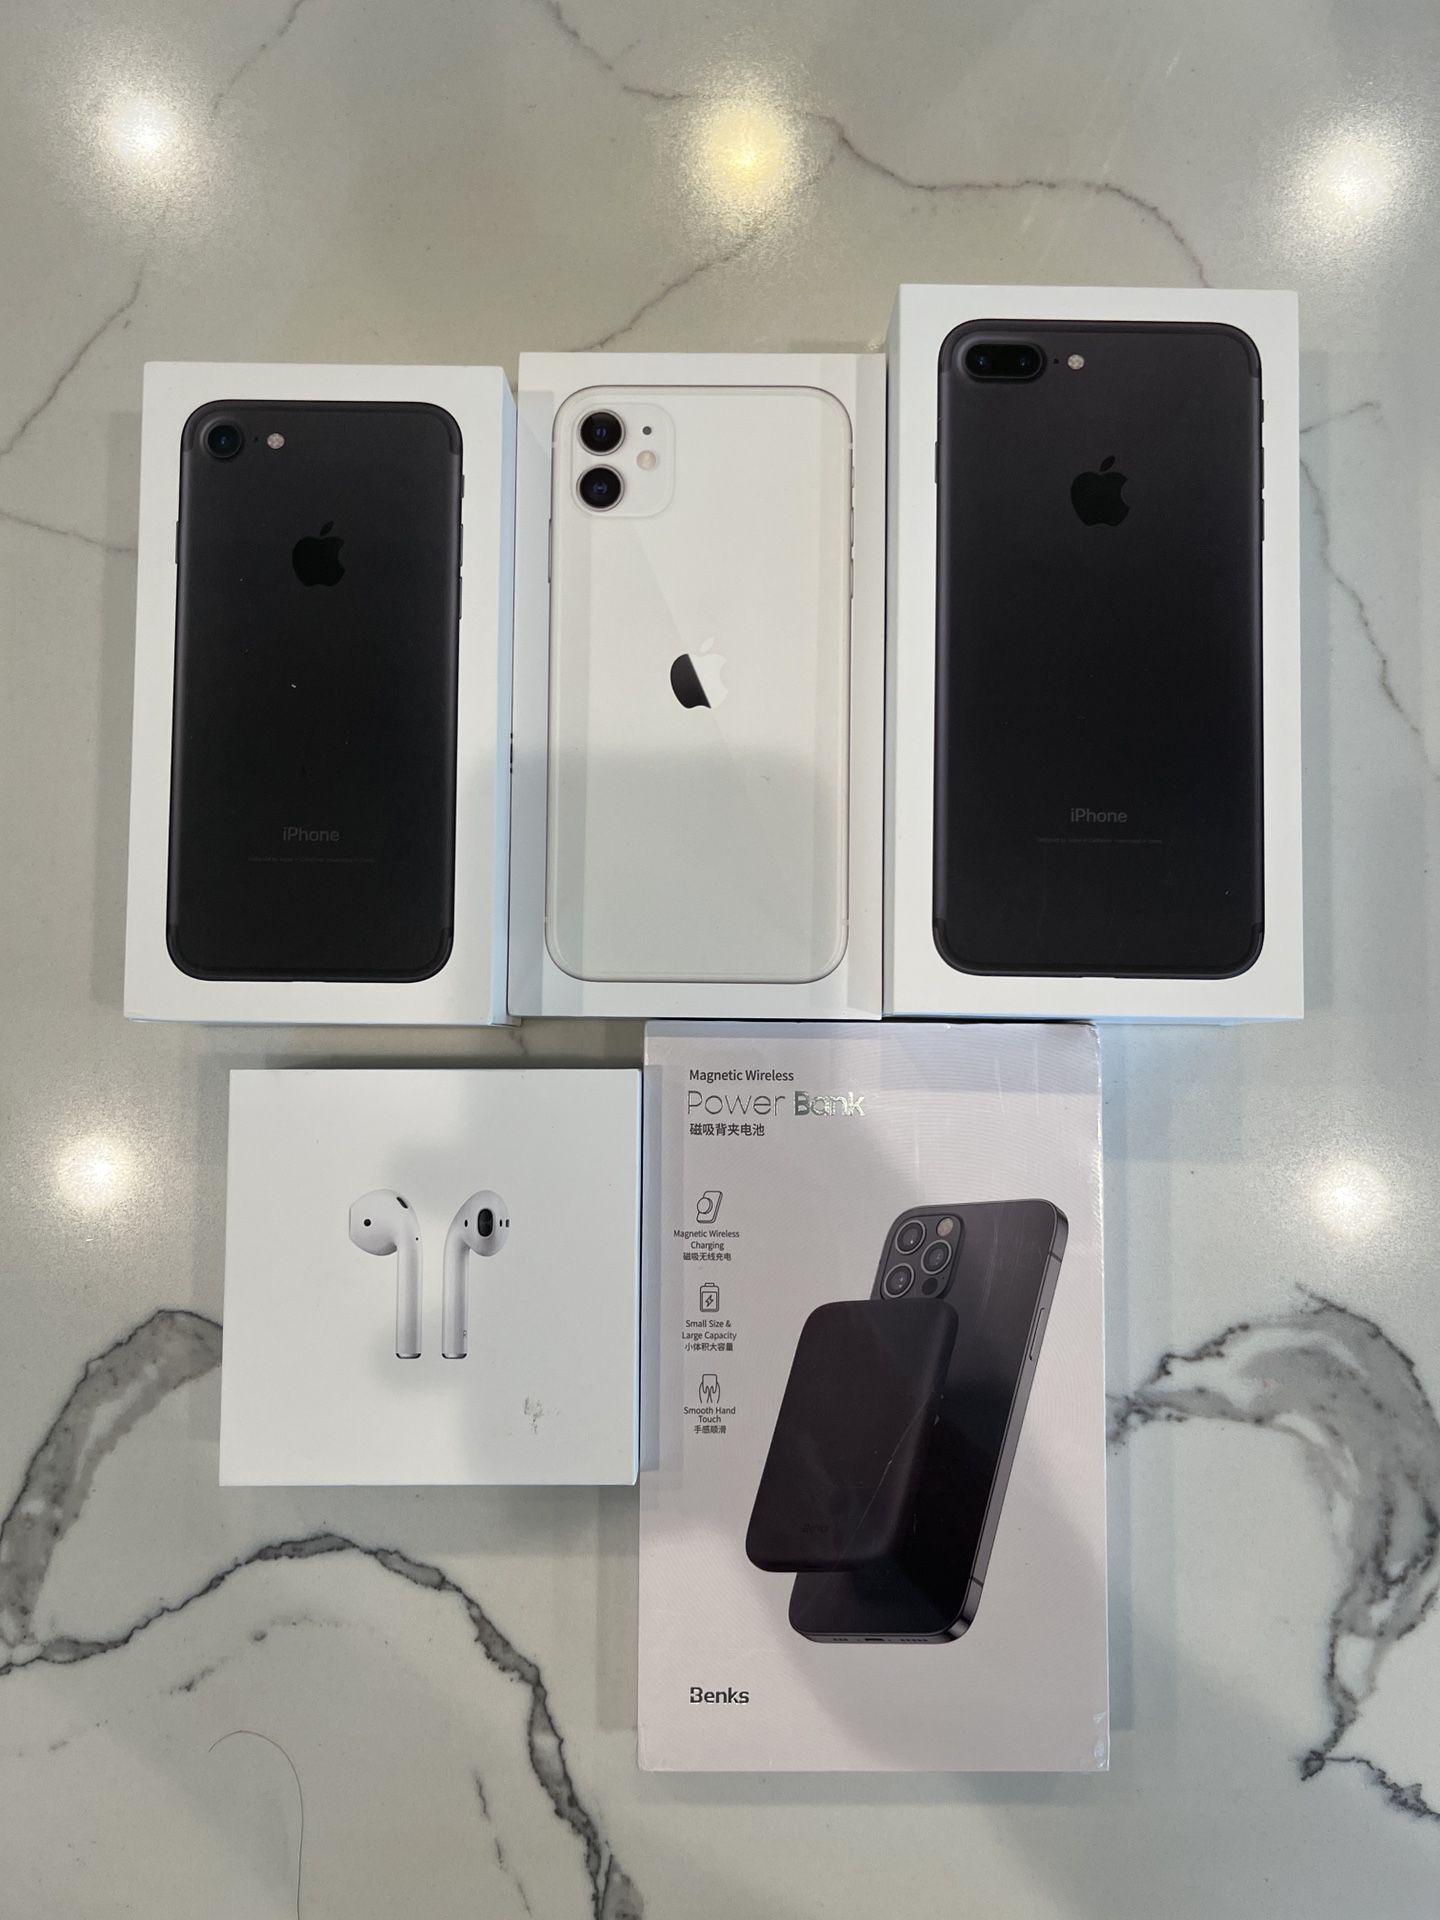 Apple Products (iPhones, AirPods)